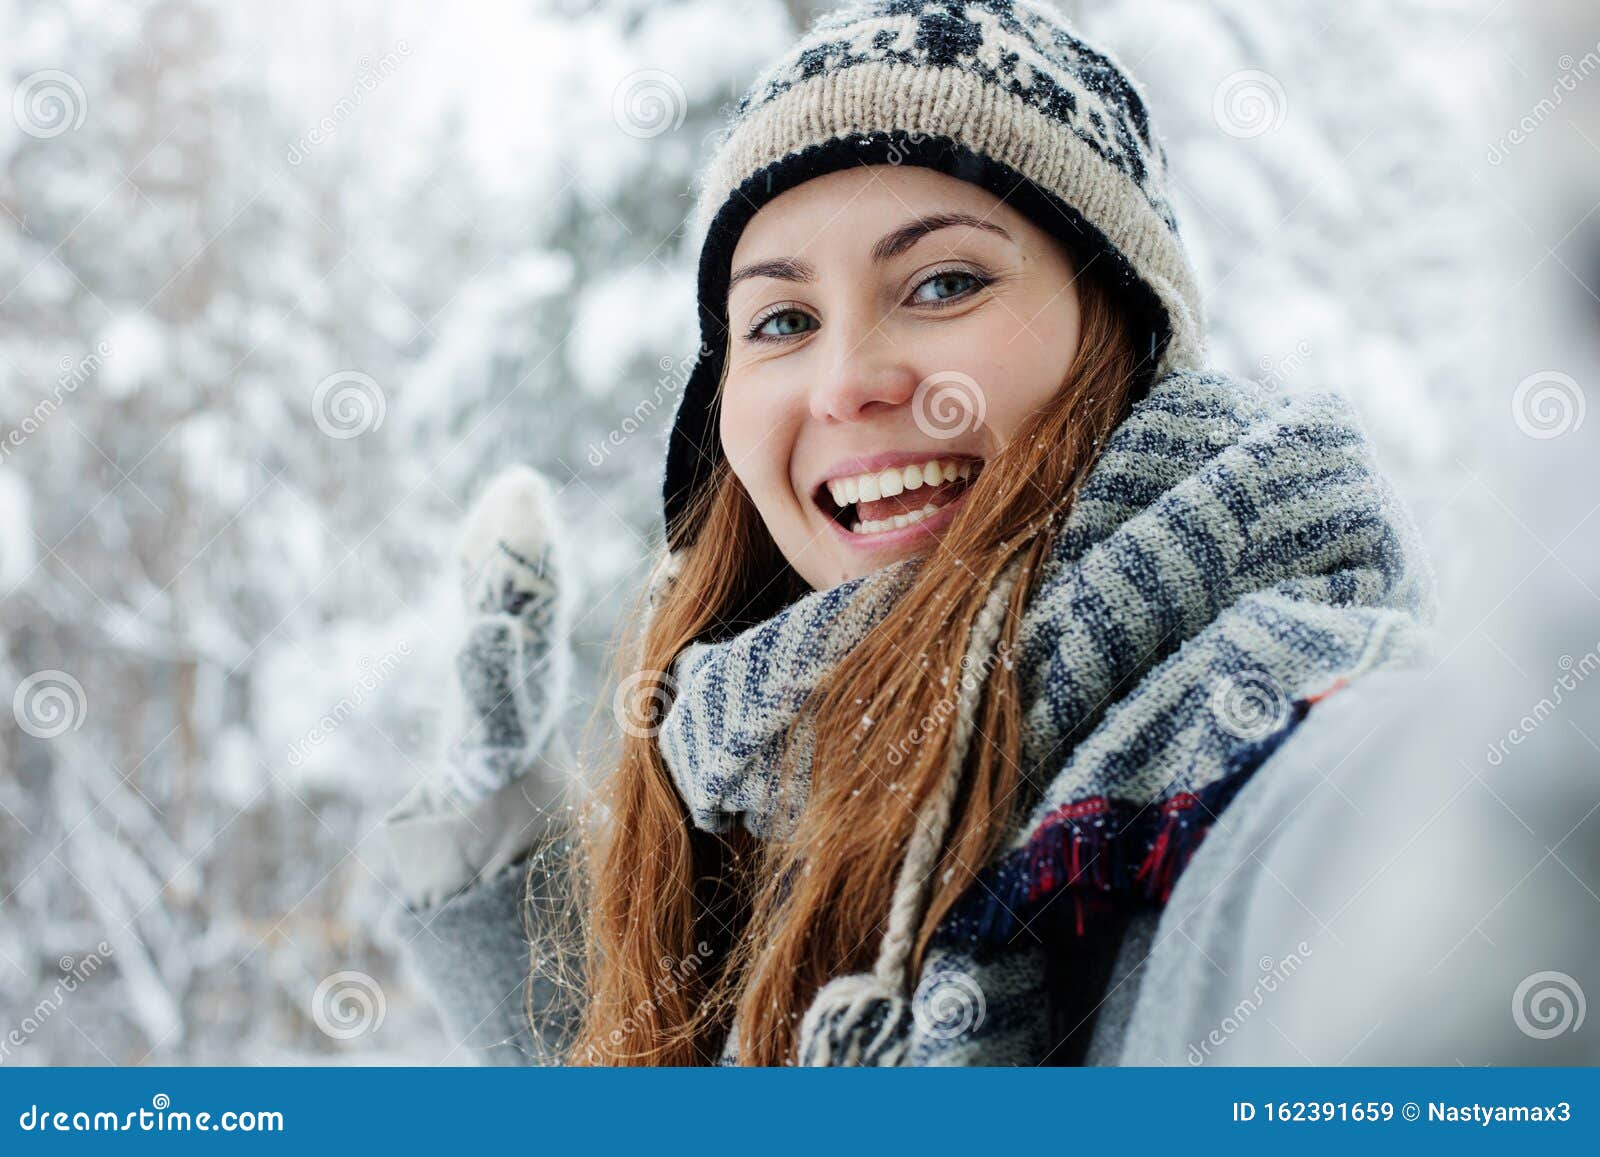 Beautiful Young Woman Standing among Snowy Trees in Winter Forest and ...